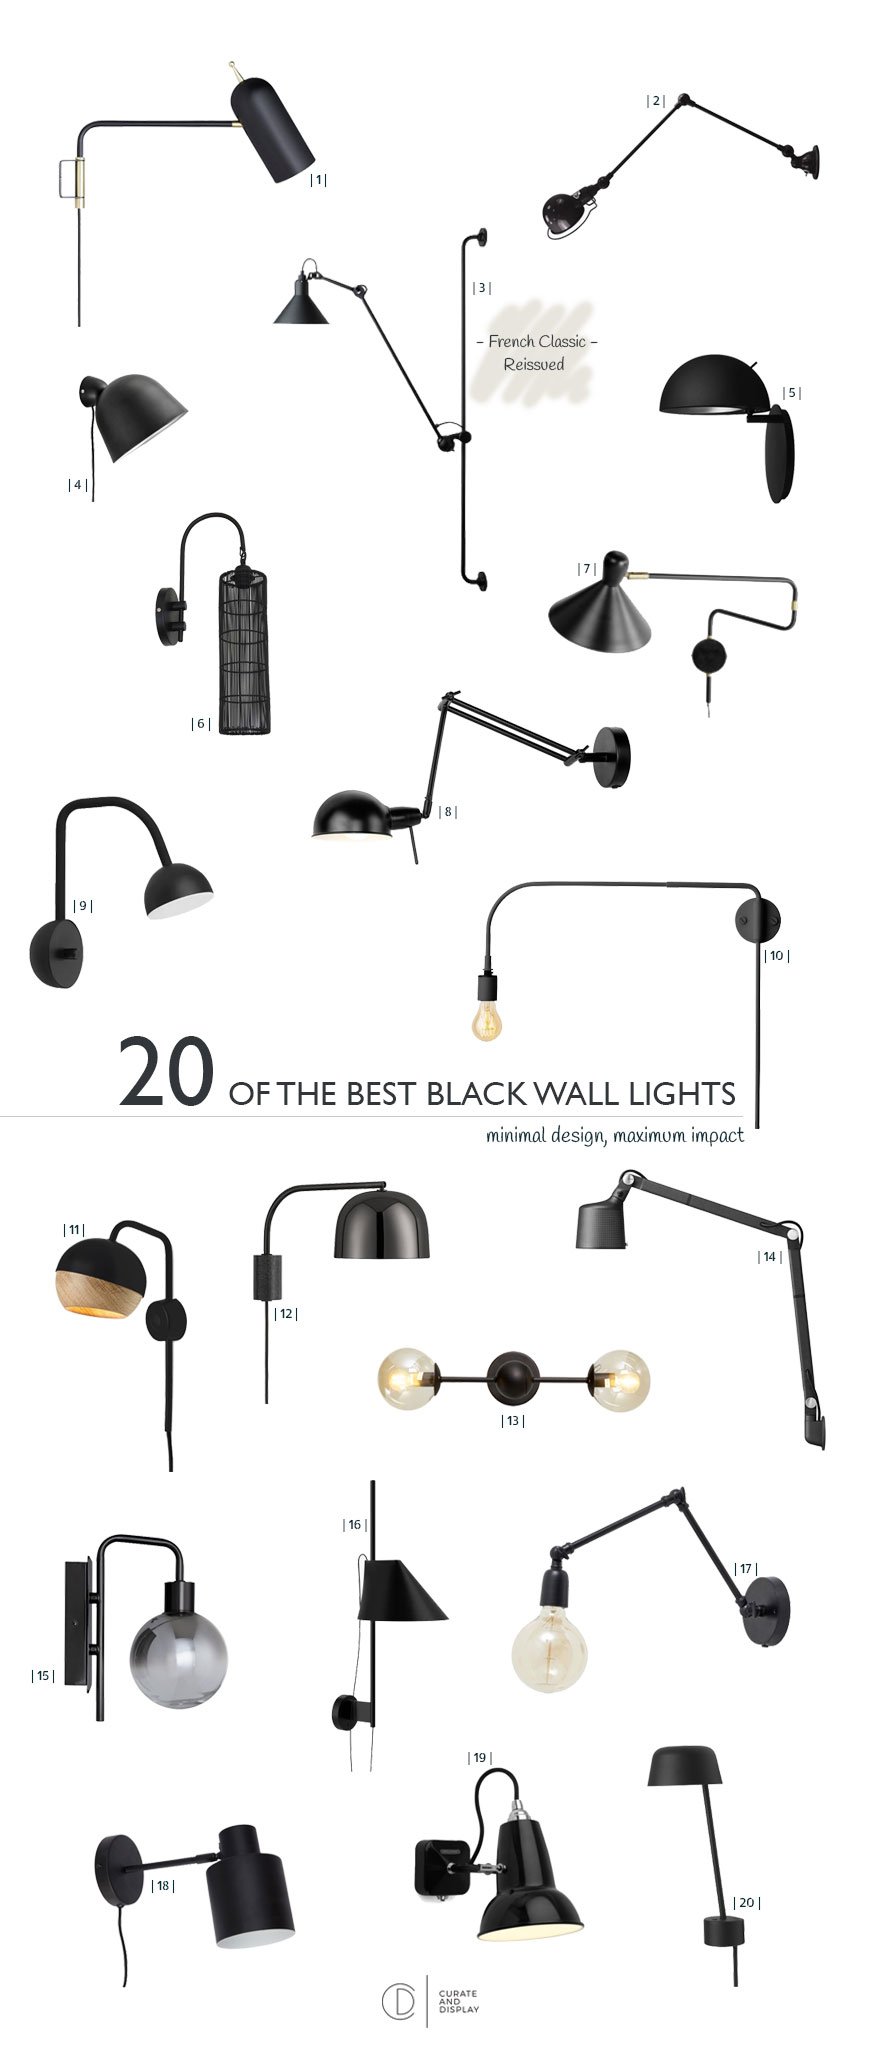 20 of the best black wall lights ranging from budget to blow out!